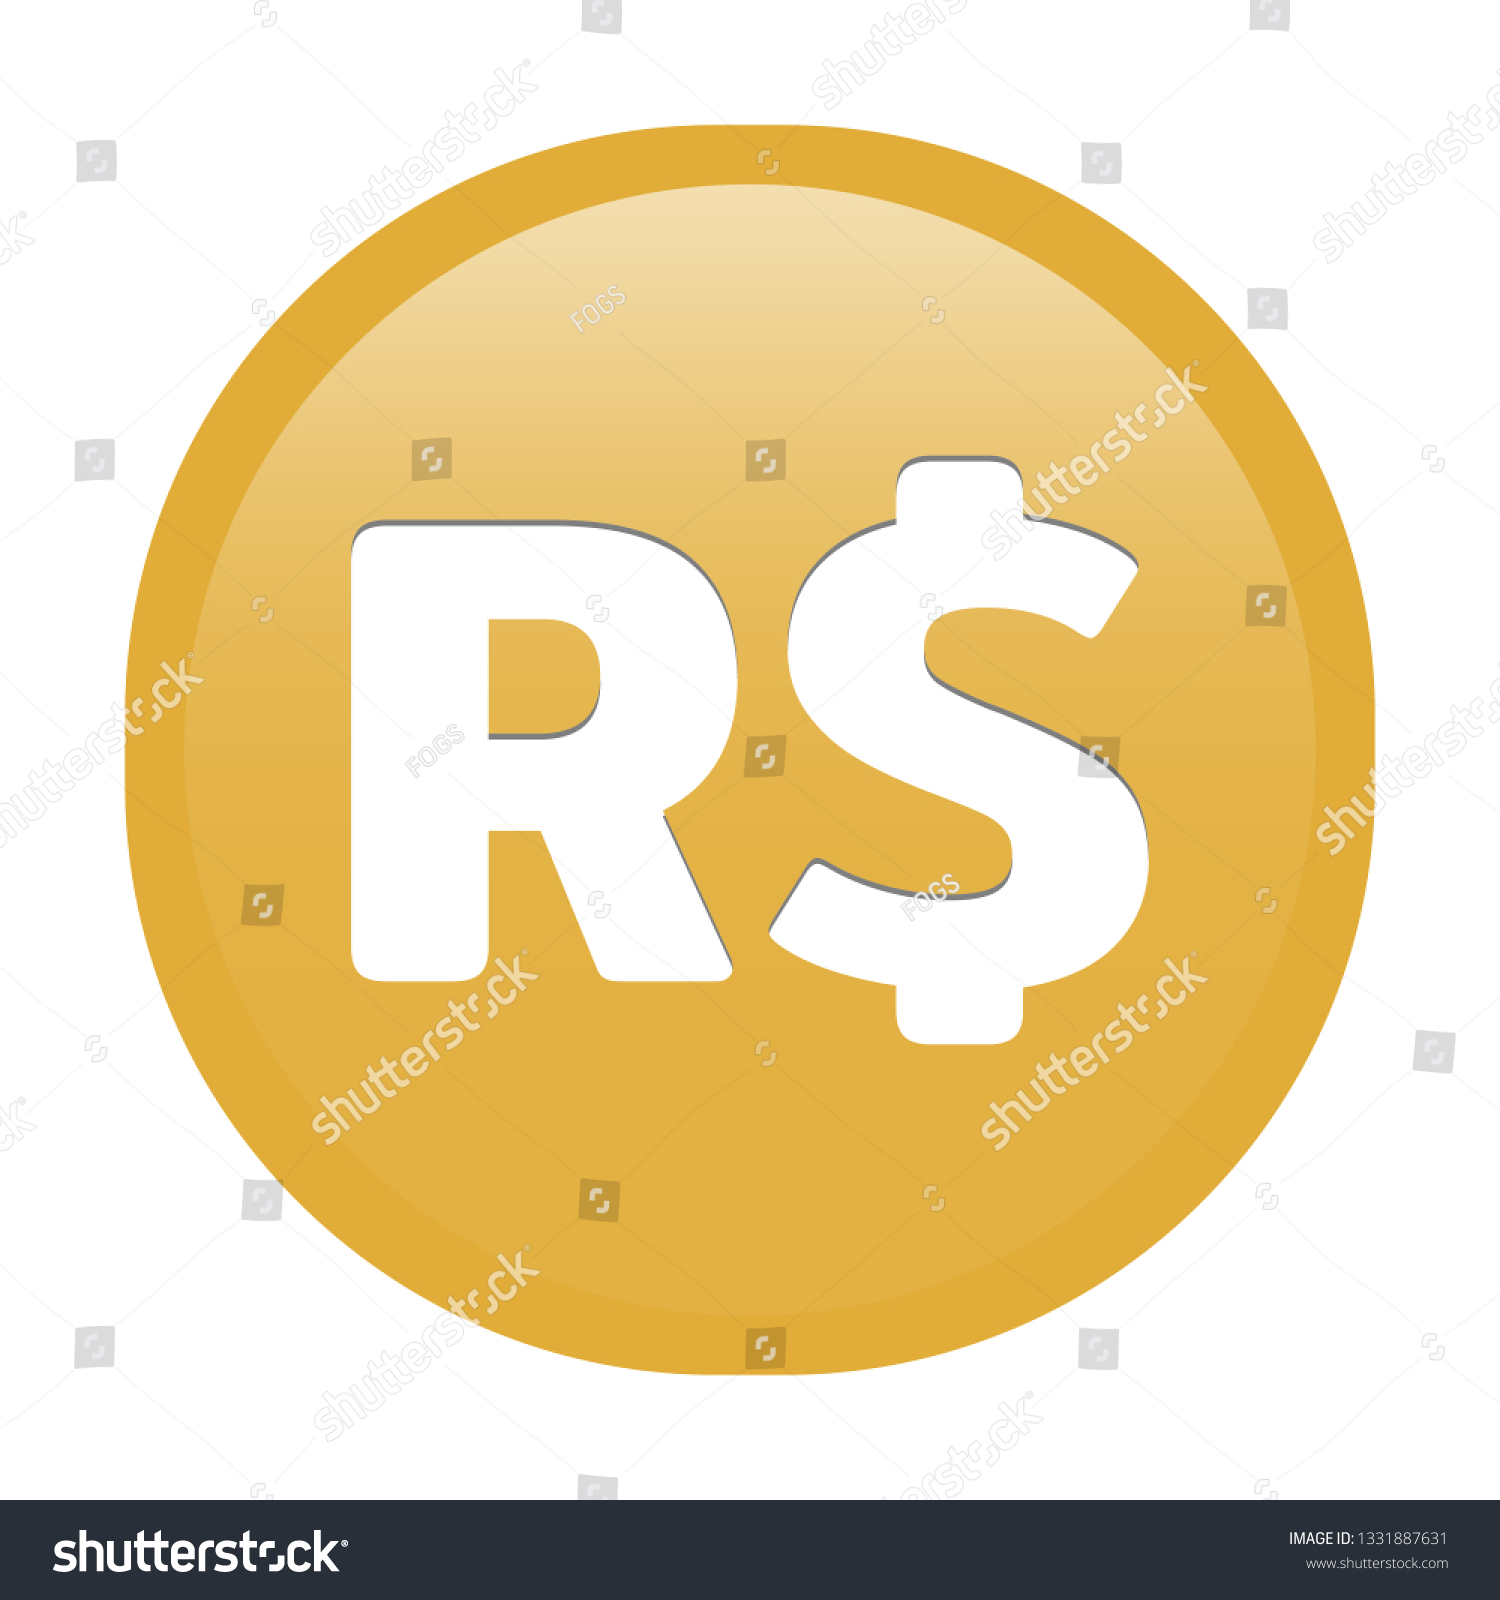 SVG of Simple soft Yellow GOLD Currency symbols icon : Brazil’s Brazilian real BRL circle money coin button with inner shadow illustration in vector svg